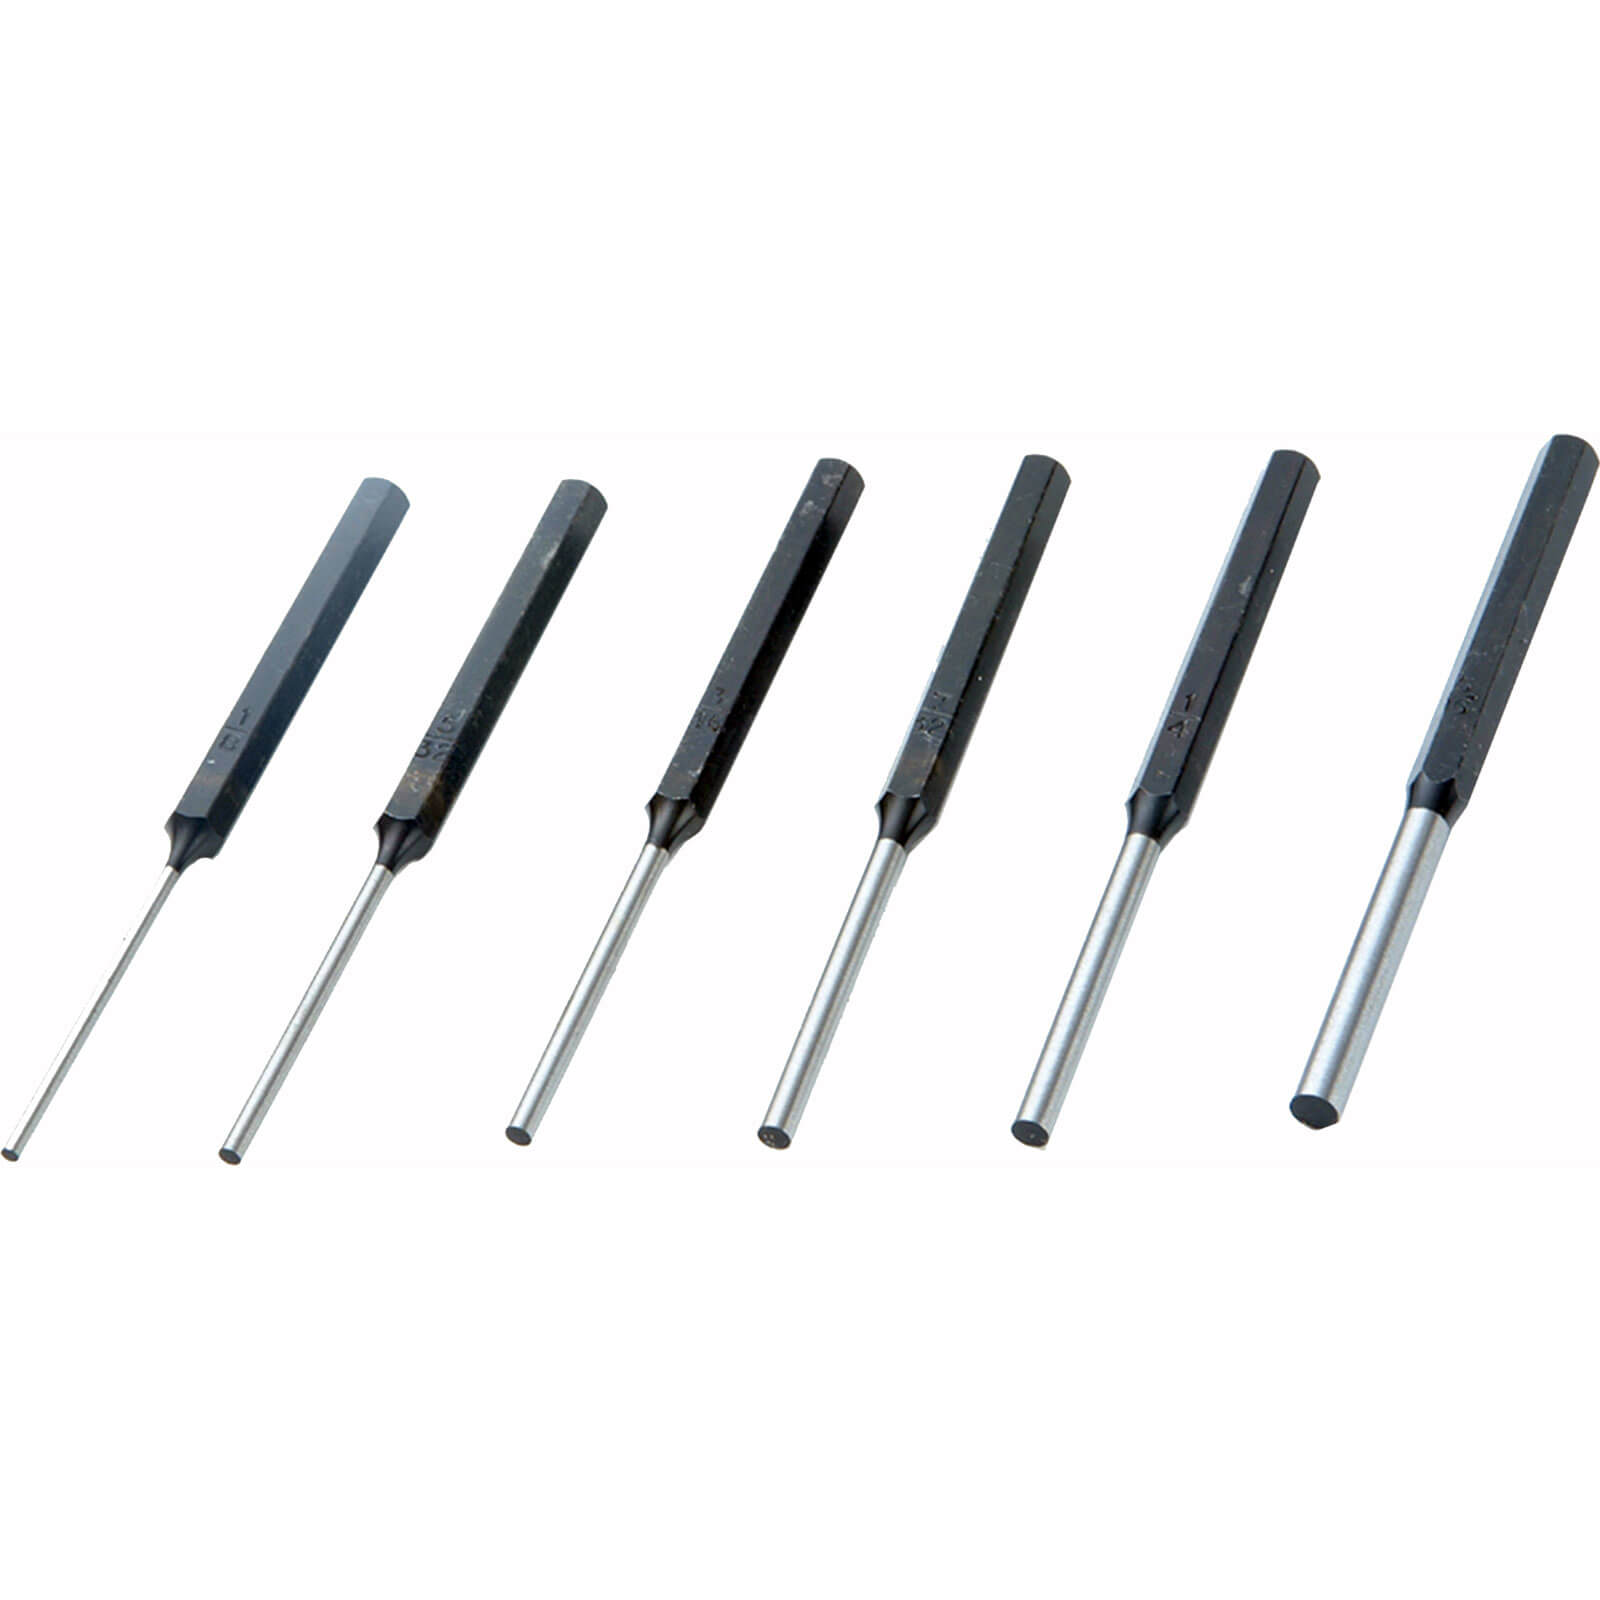 Image of Priory 6 Piece Long Parallel Pin Punch Set